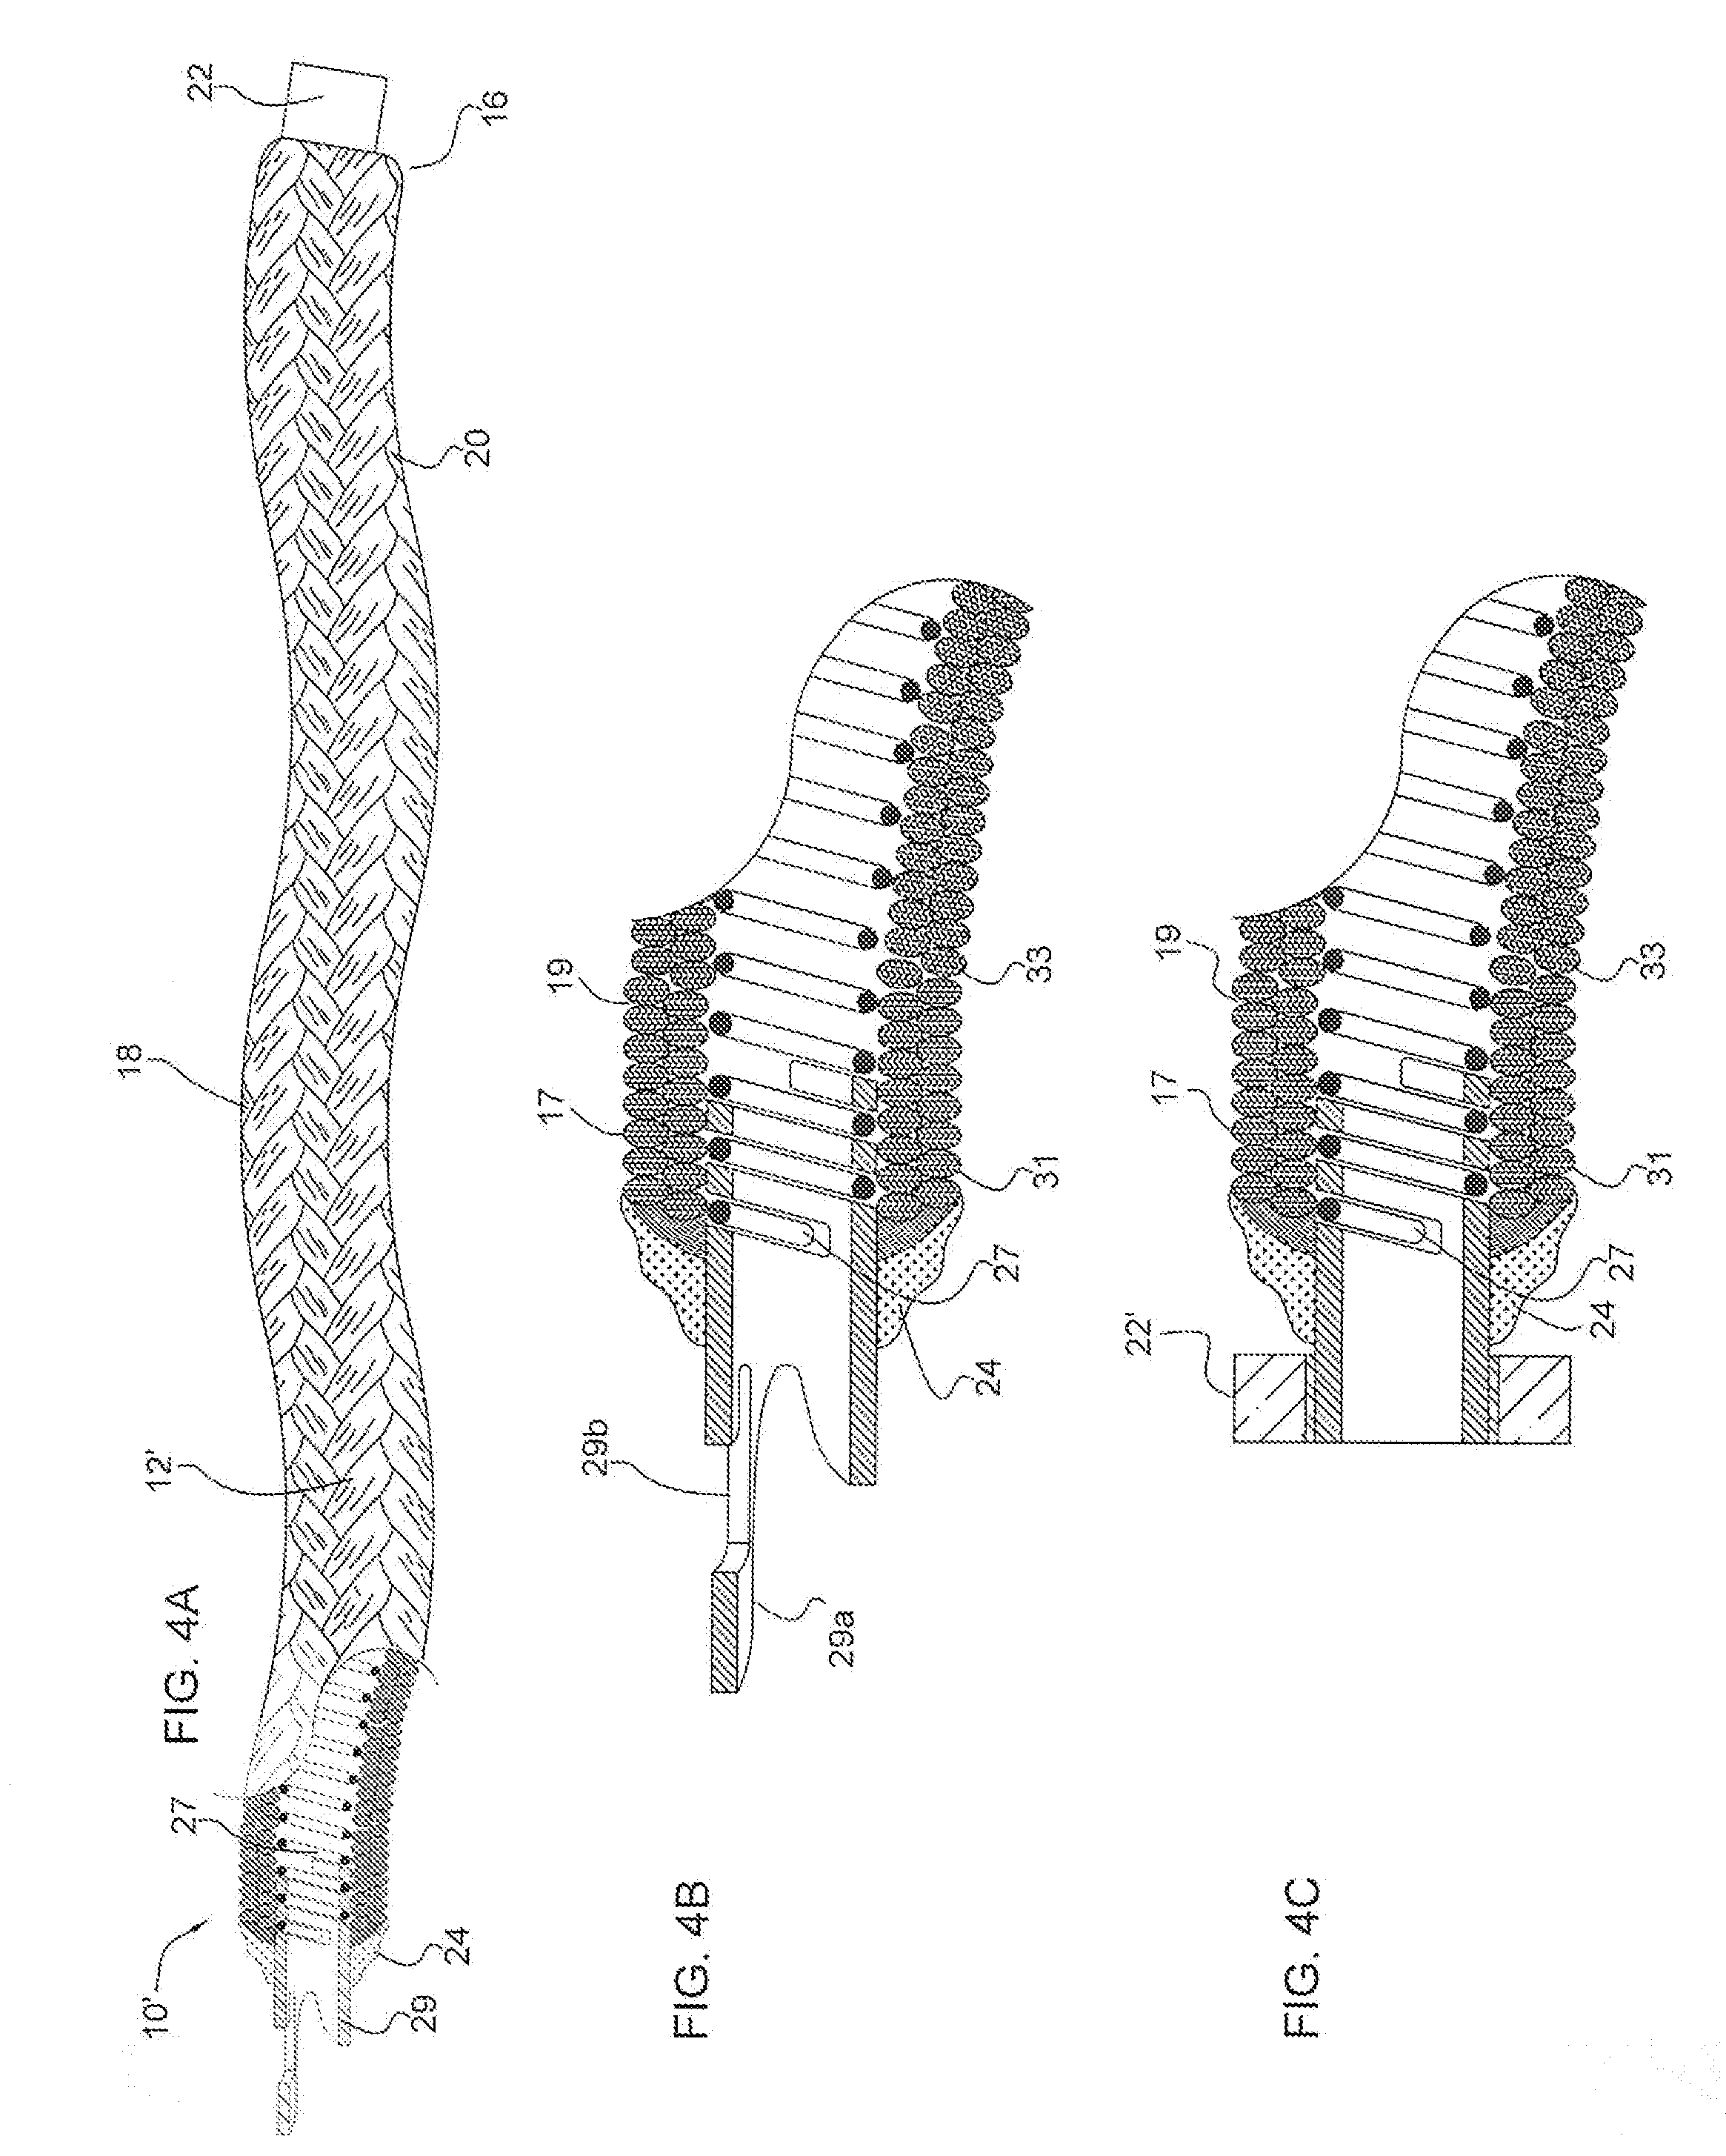 Micrograft for the treatment of intracranial aneurysms and method for use